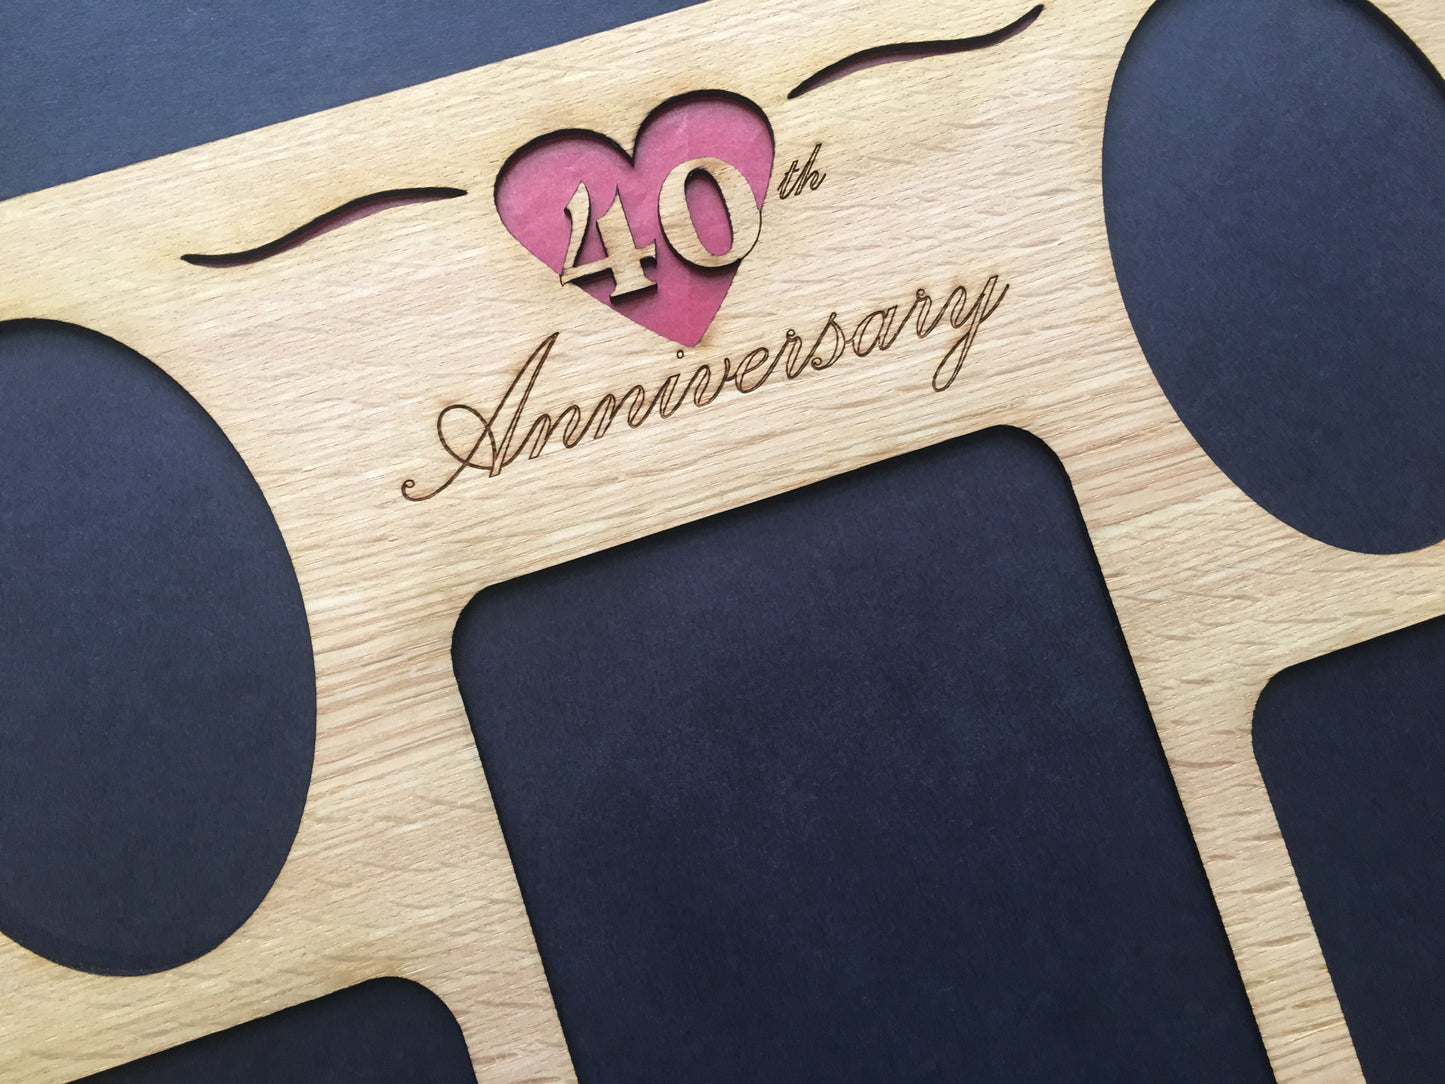 Anniversary Picture Frame